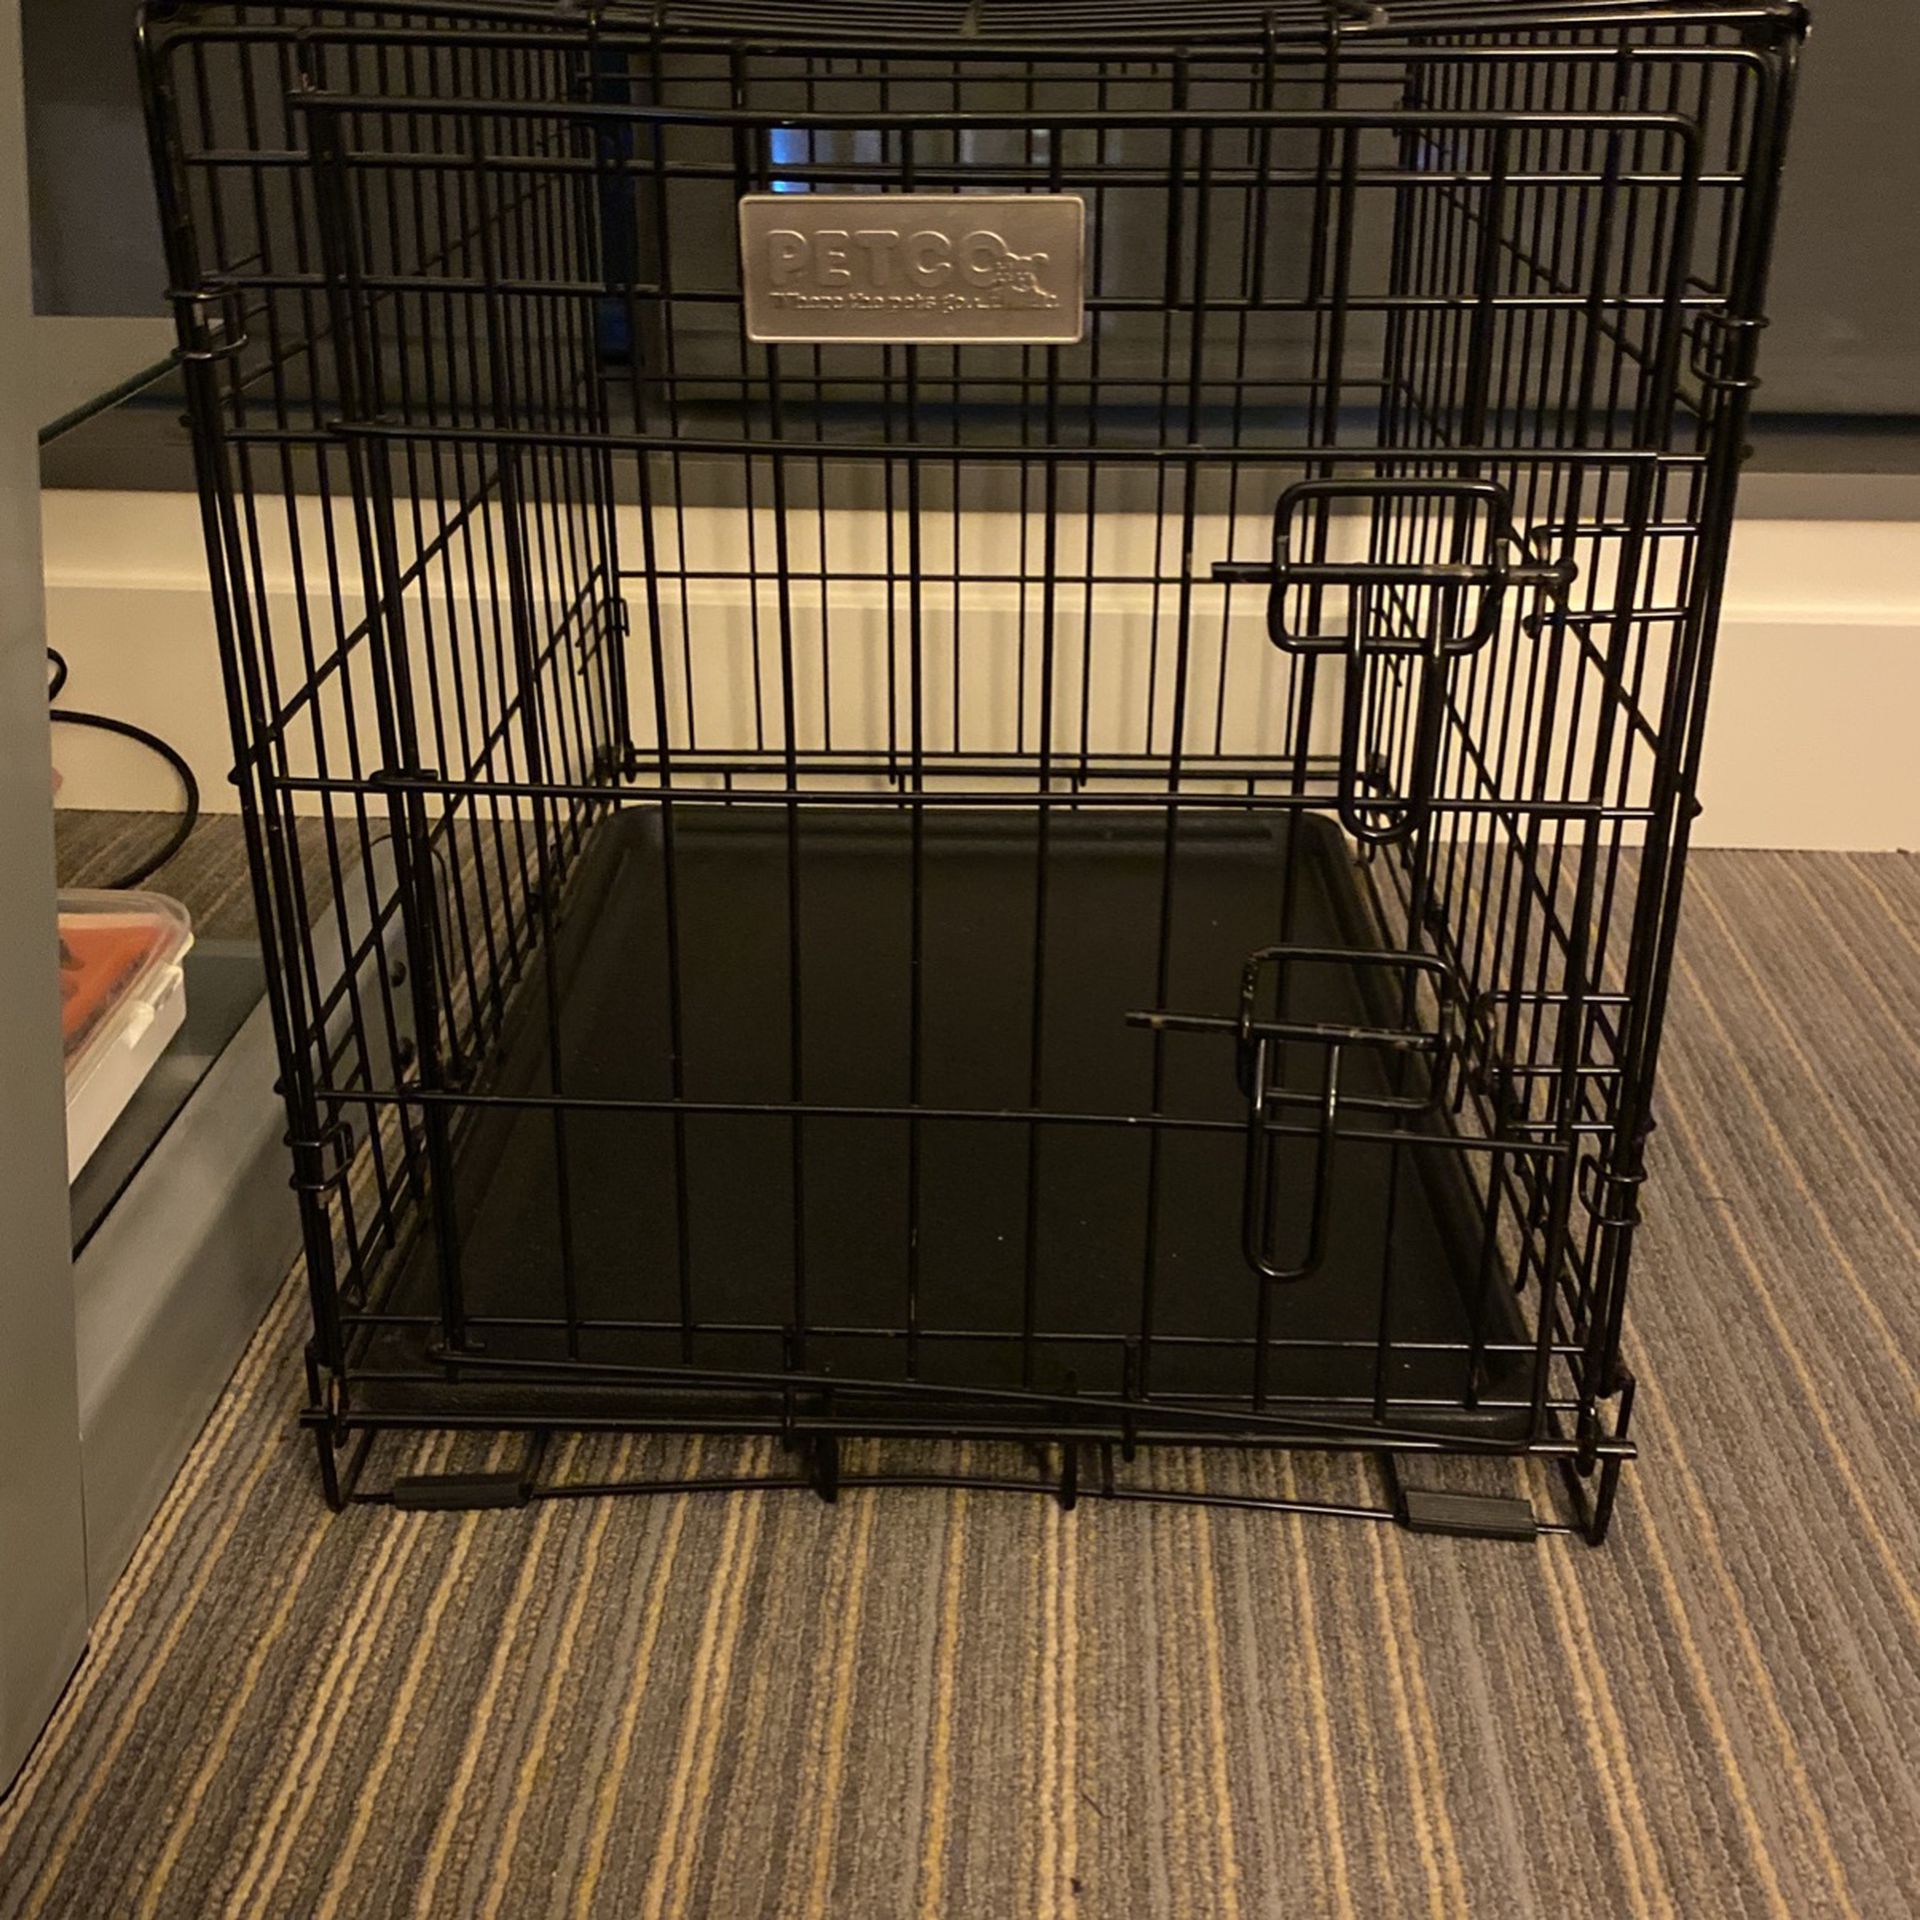 Petco Animal Crate/Kennel